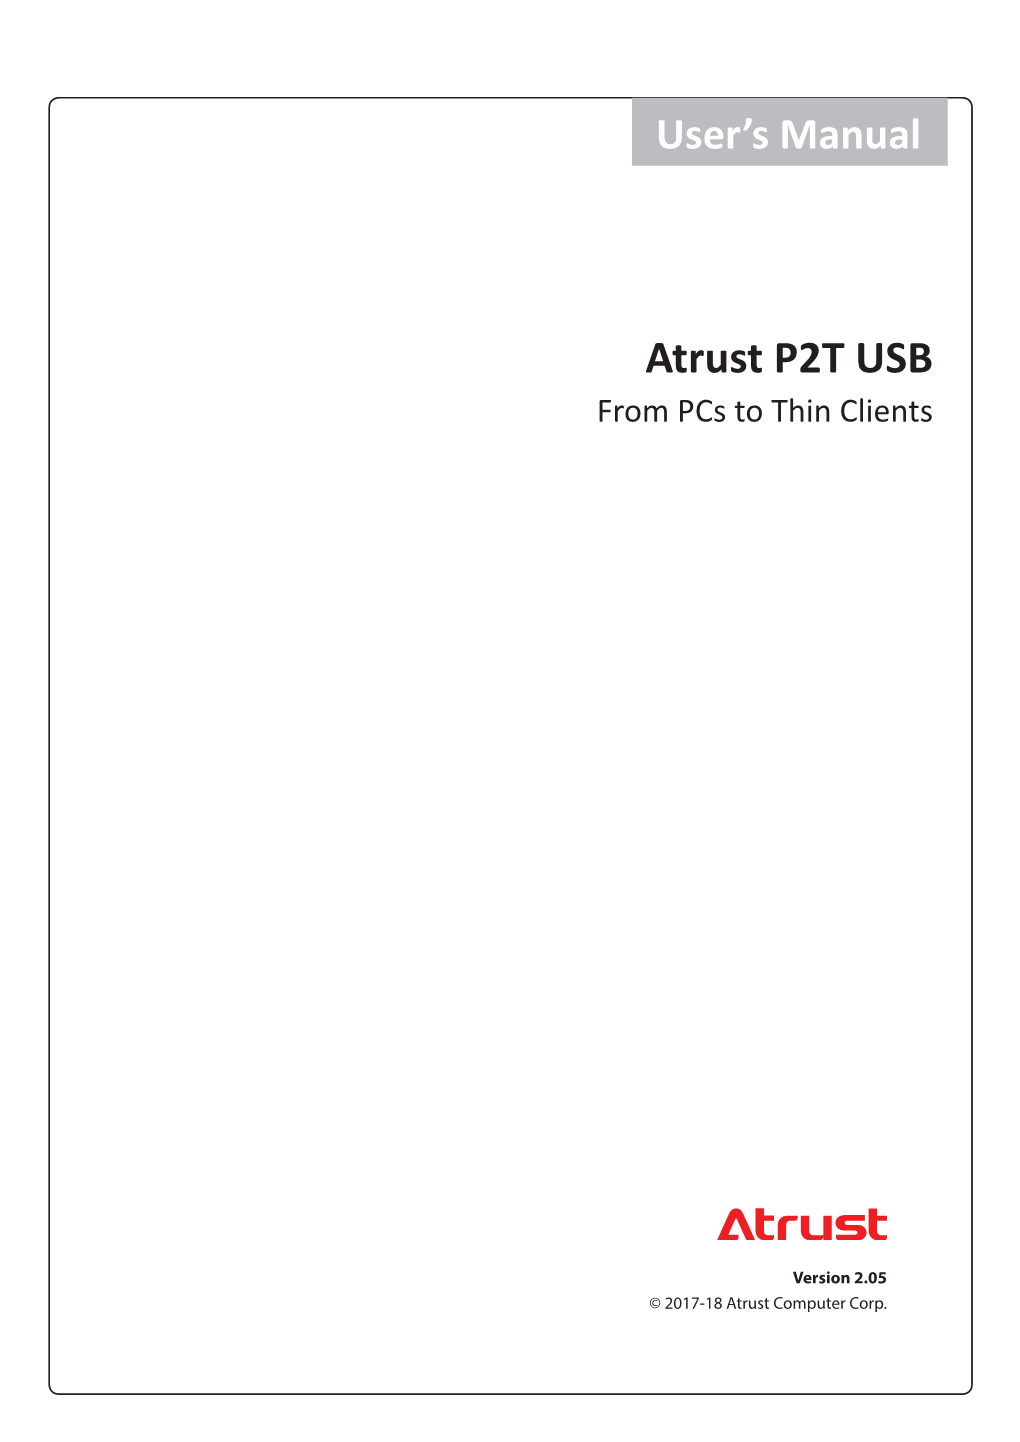 Atrust P2T USB from Pcs to Thin Clients